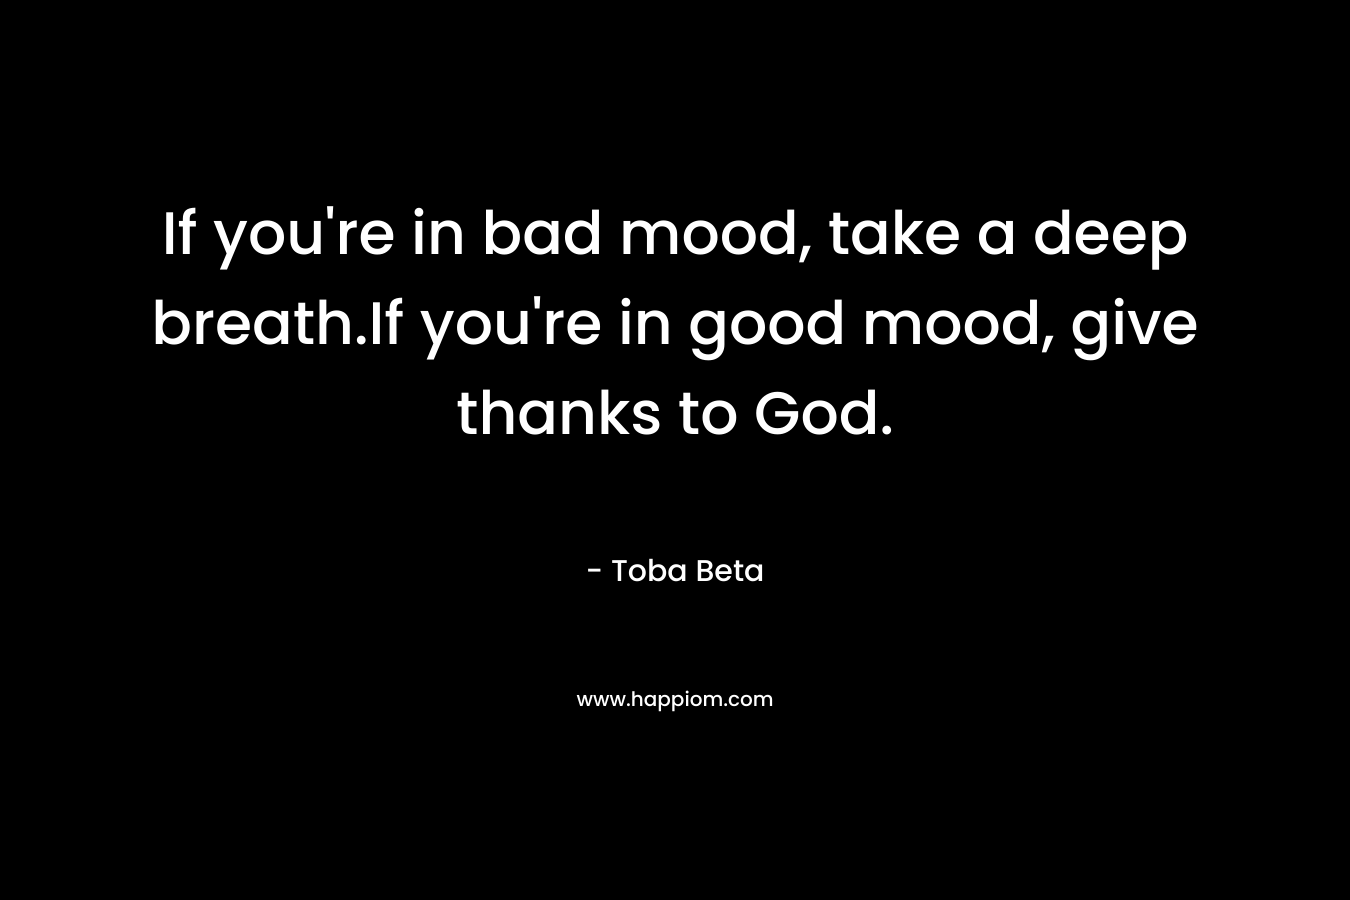 If you’re in bad mood, take a deep breath.If you’re in good mood, give thanks to God. – Toba Beta